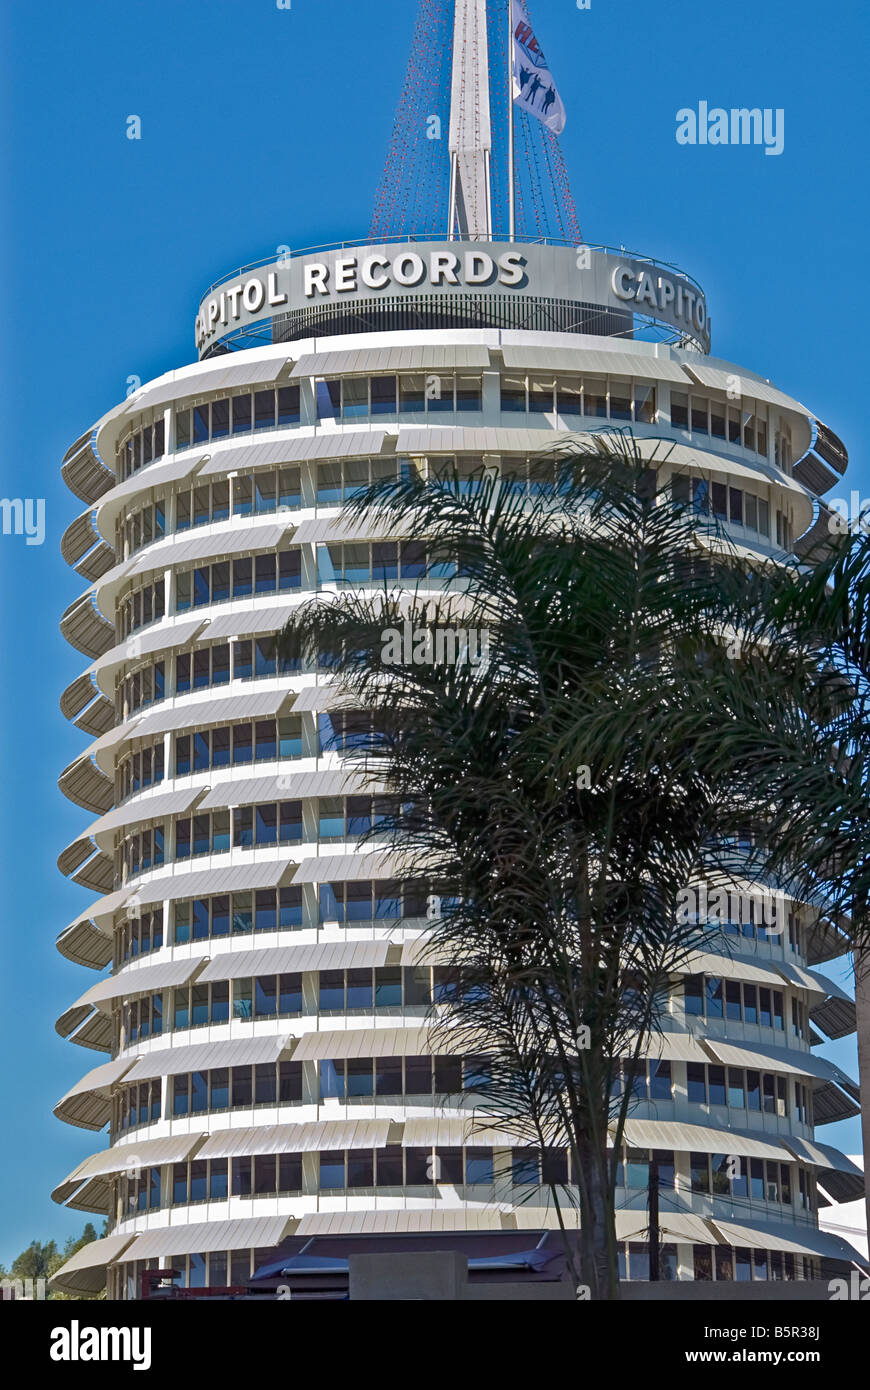 Capitol Records major United States based record label, owned by EMI  Hollywood, Los Angeles CA California headquarters building Stock Photo